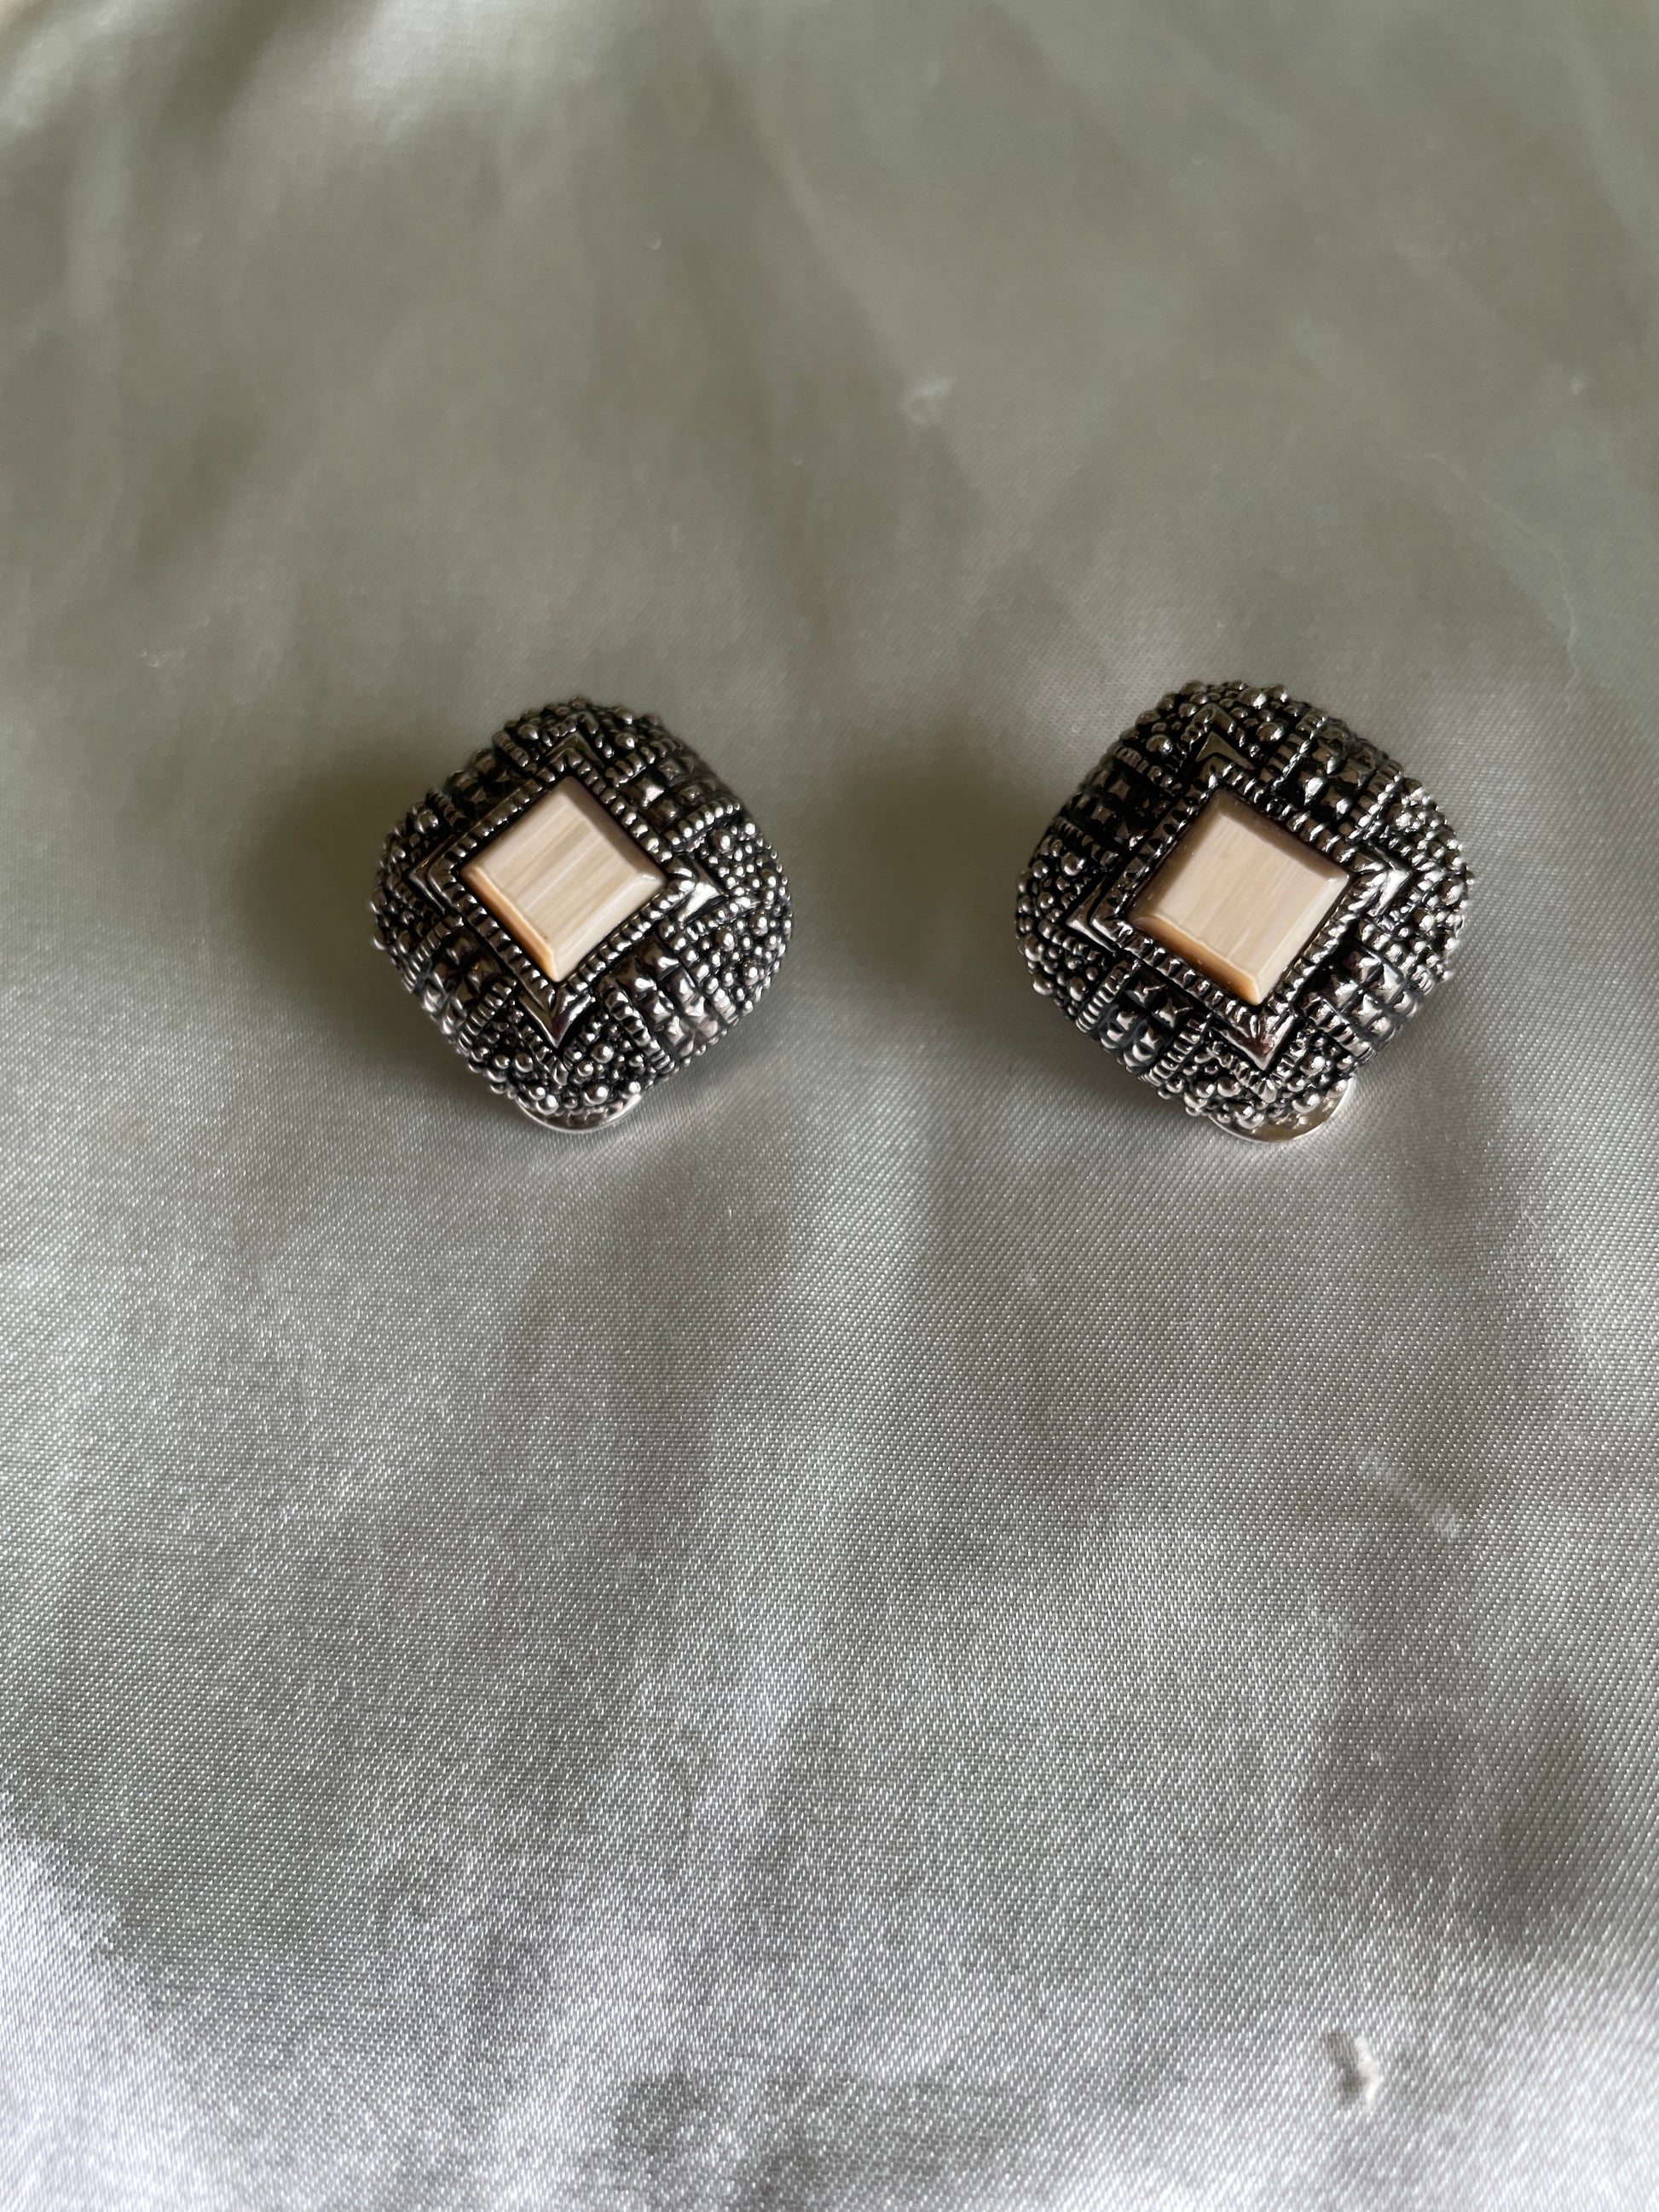  80s Silver Tone Mother of Pearl Accent Clip Earrings